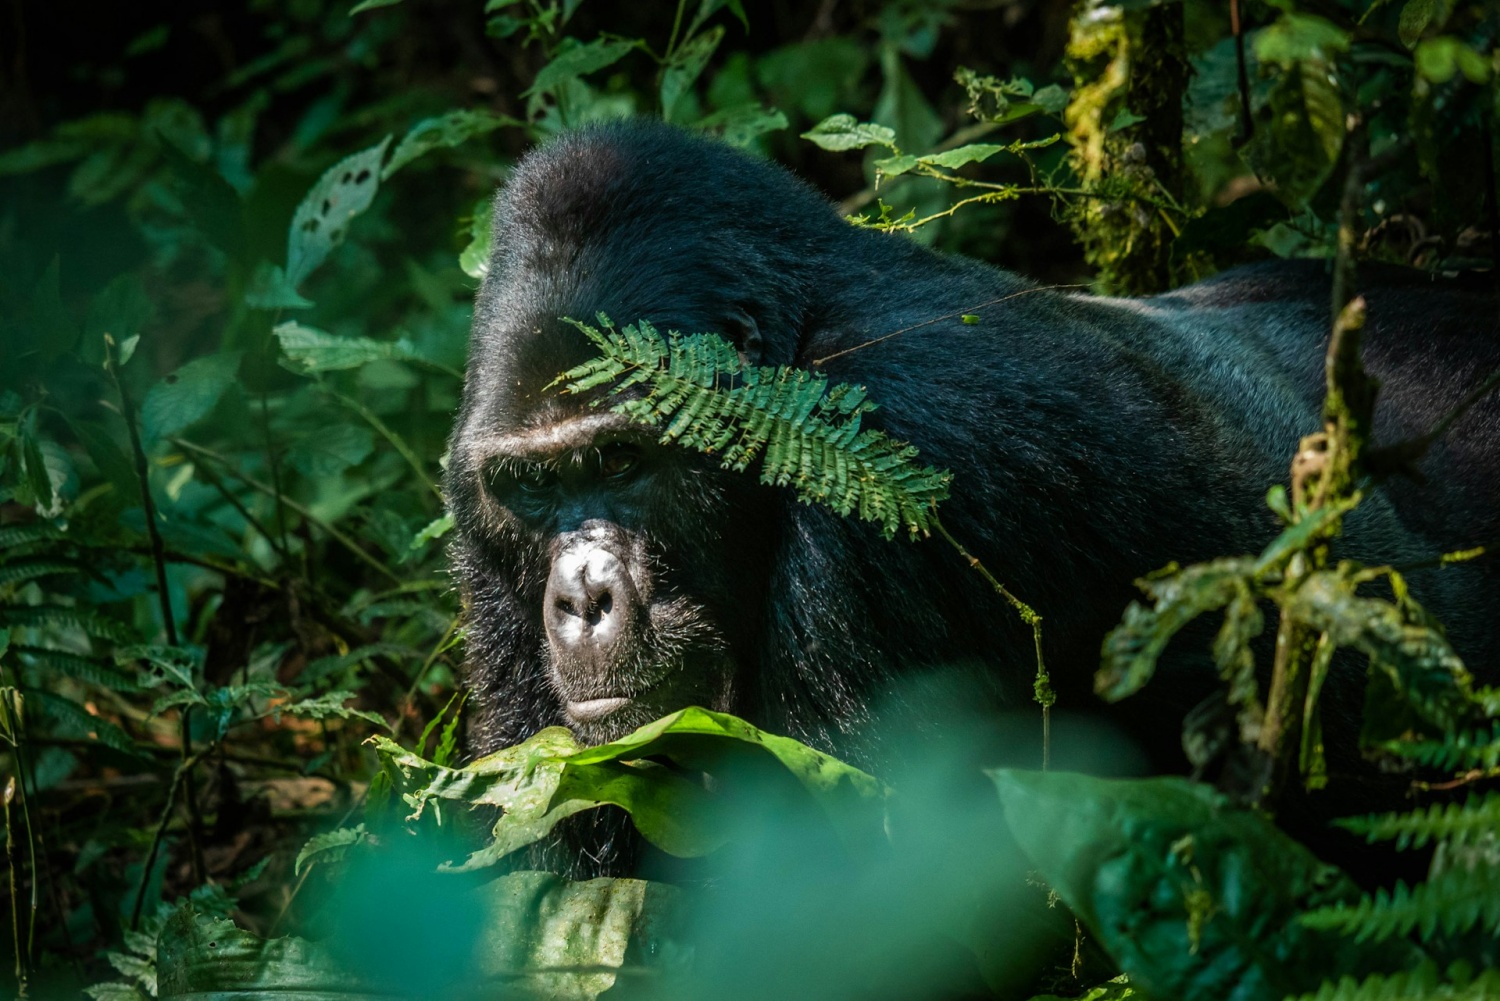 A silverback mountain gorilla rests in the forest.